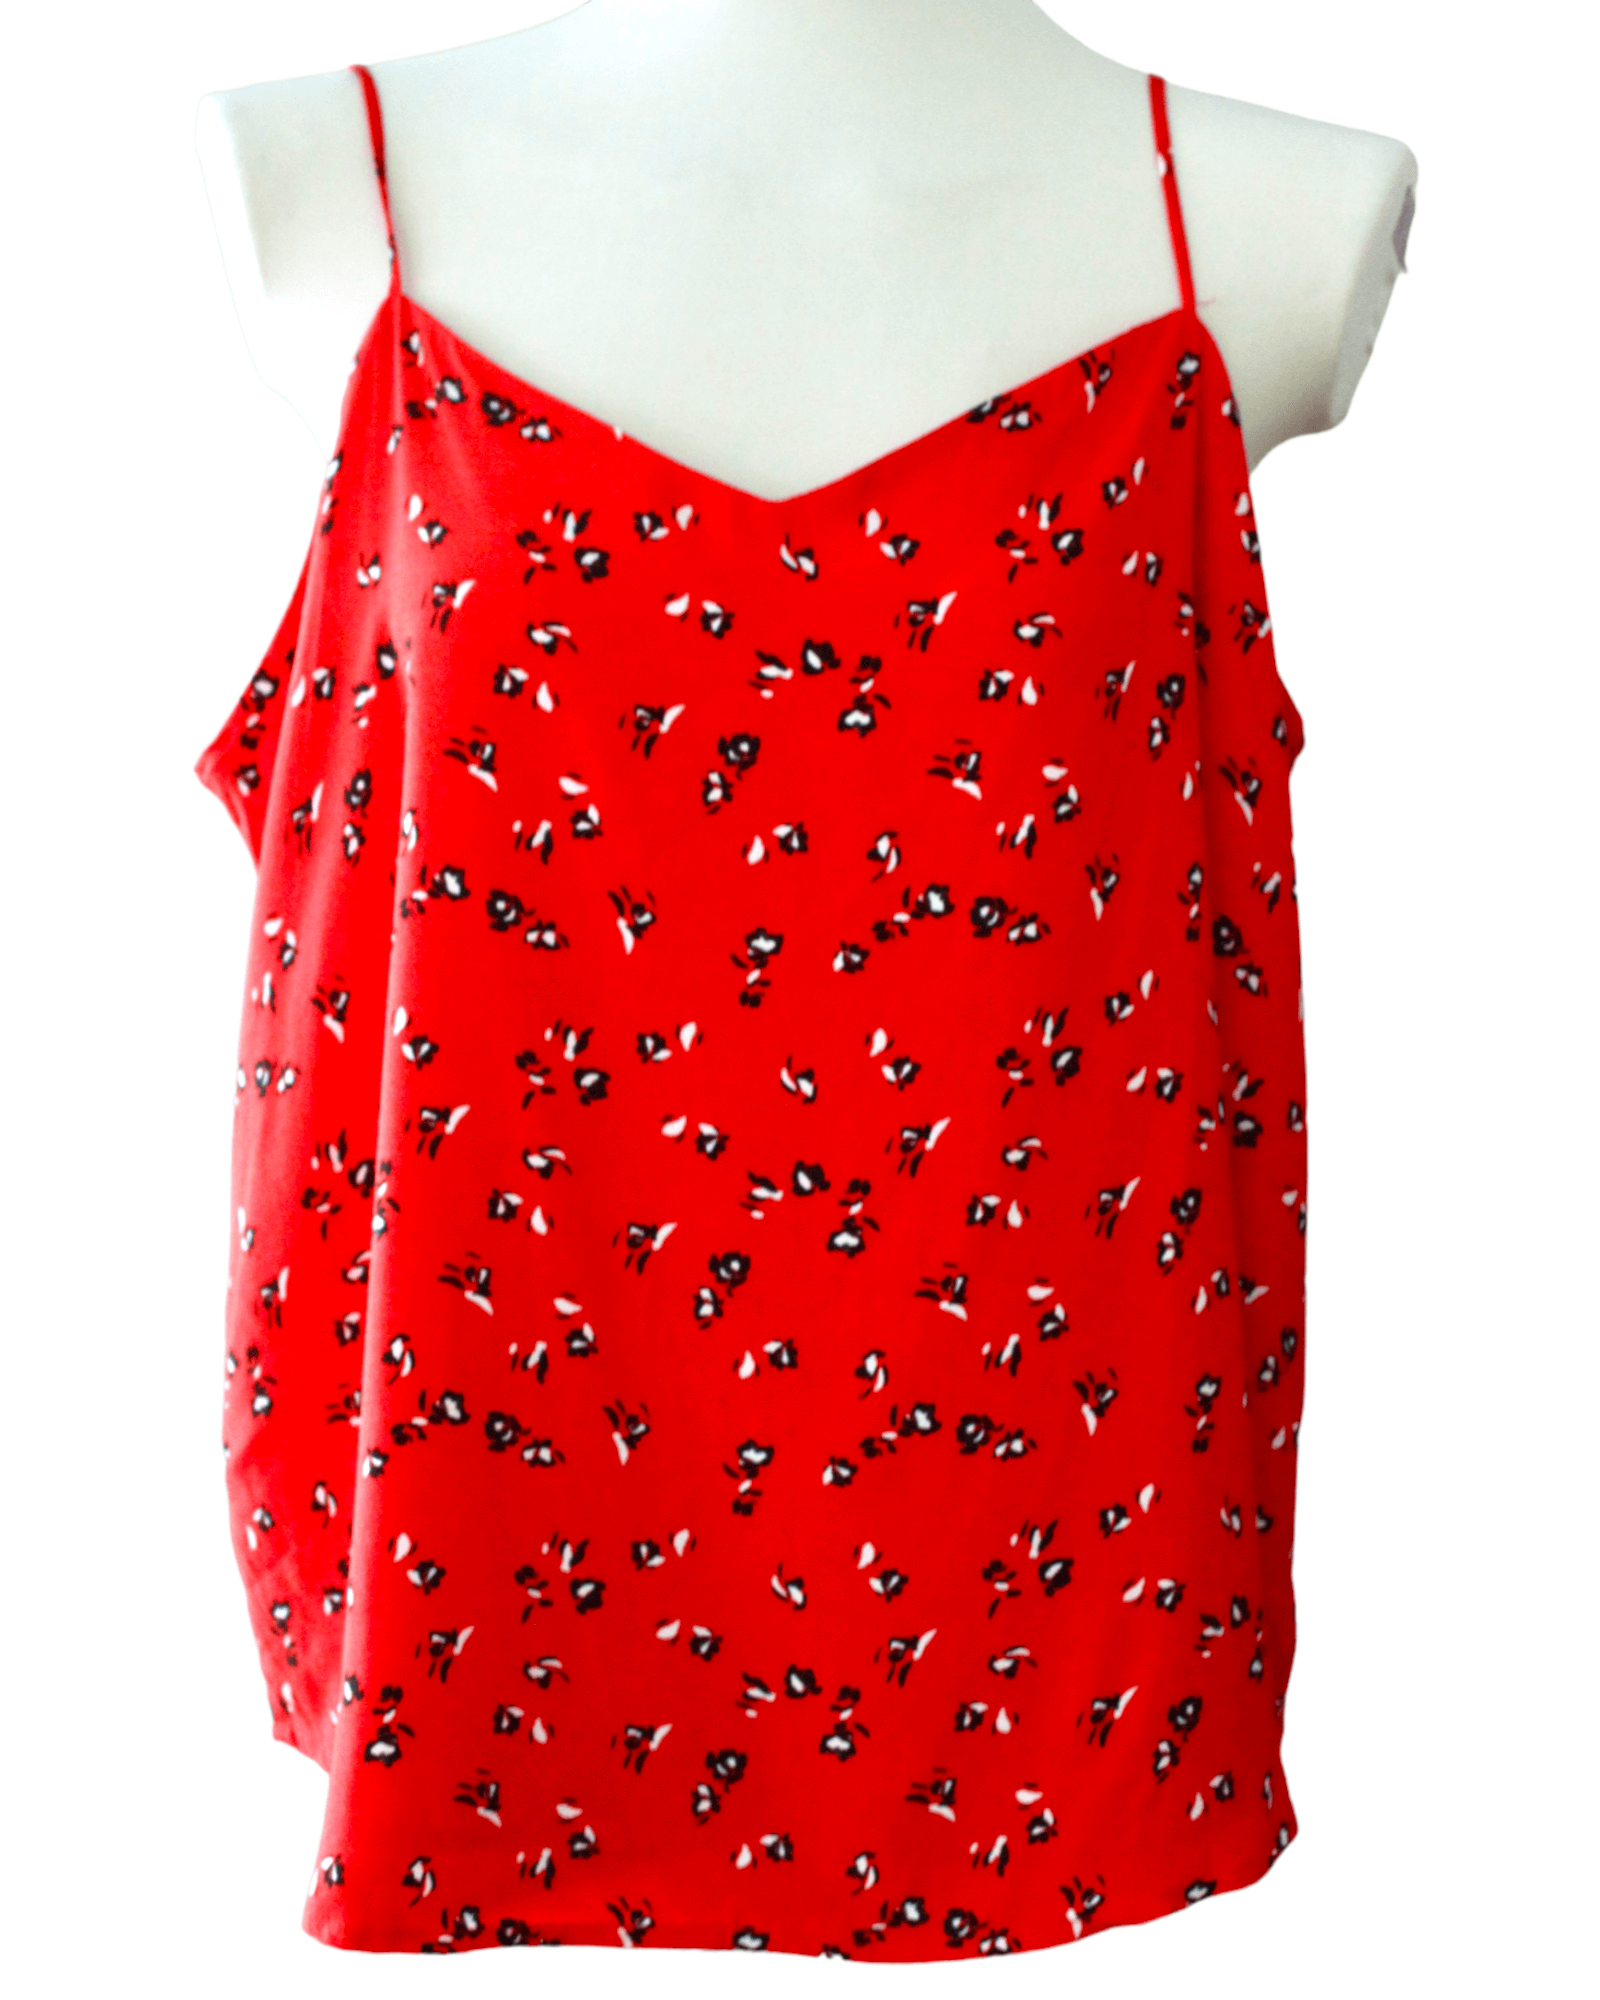 Bright Spring GAP red black and white floral print cami top